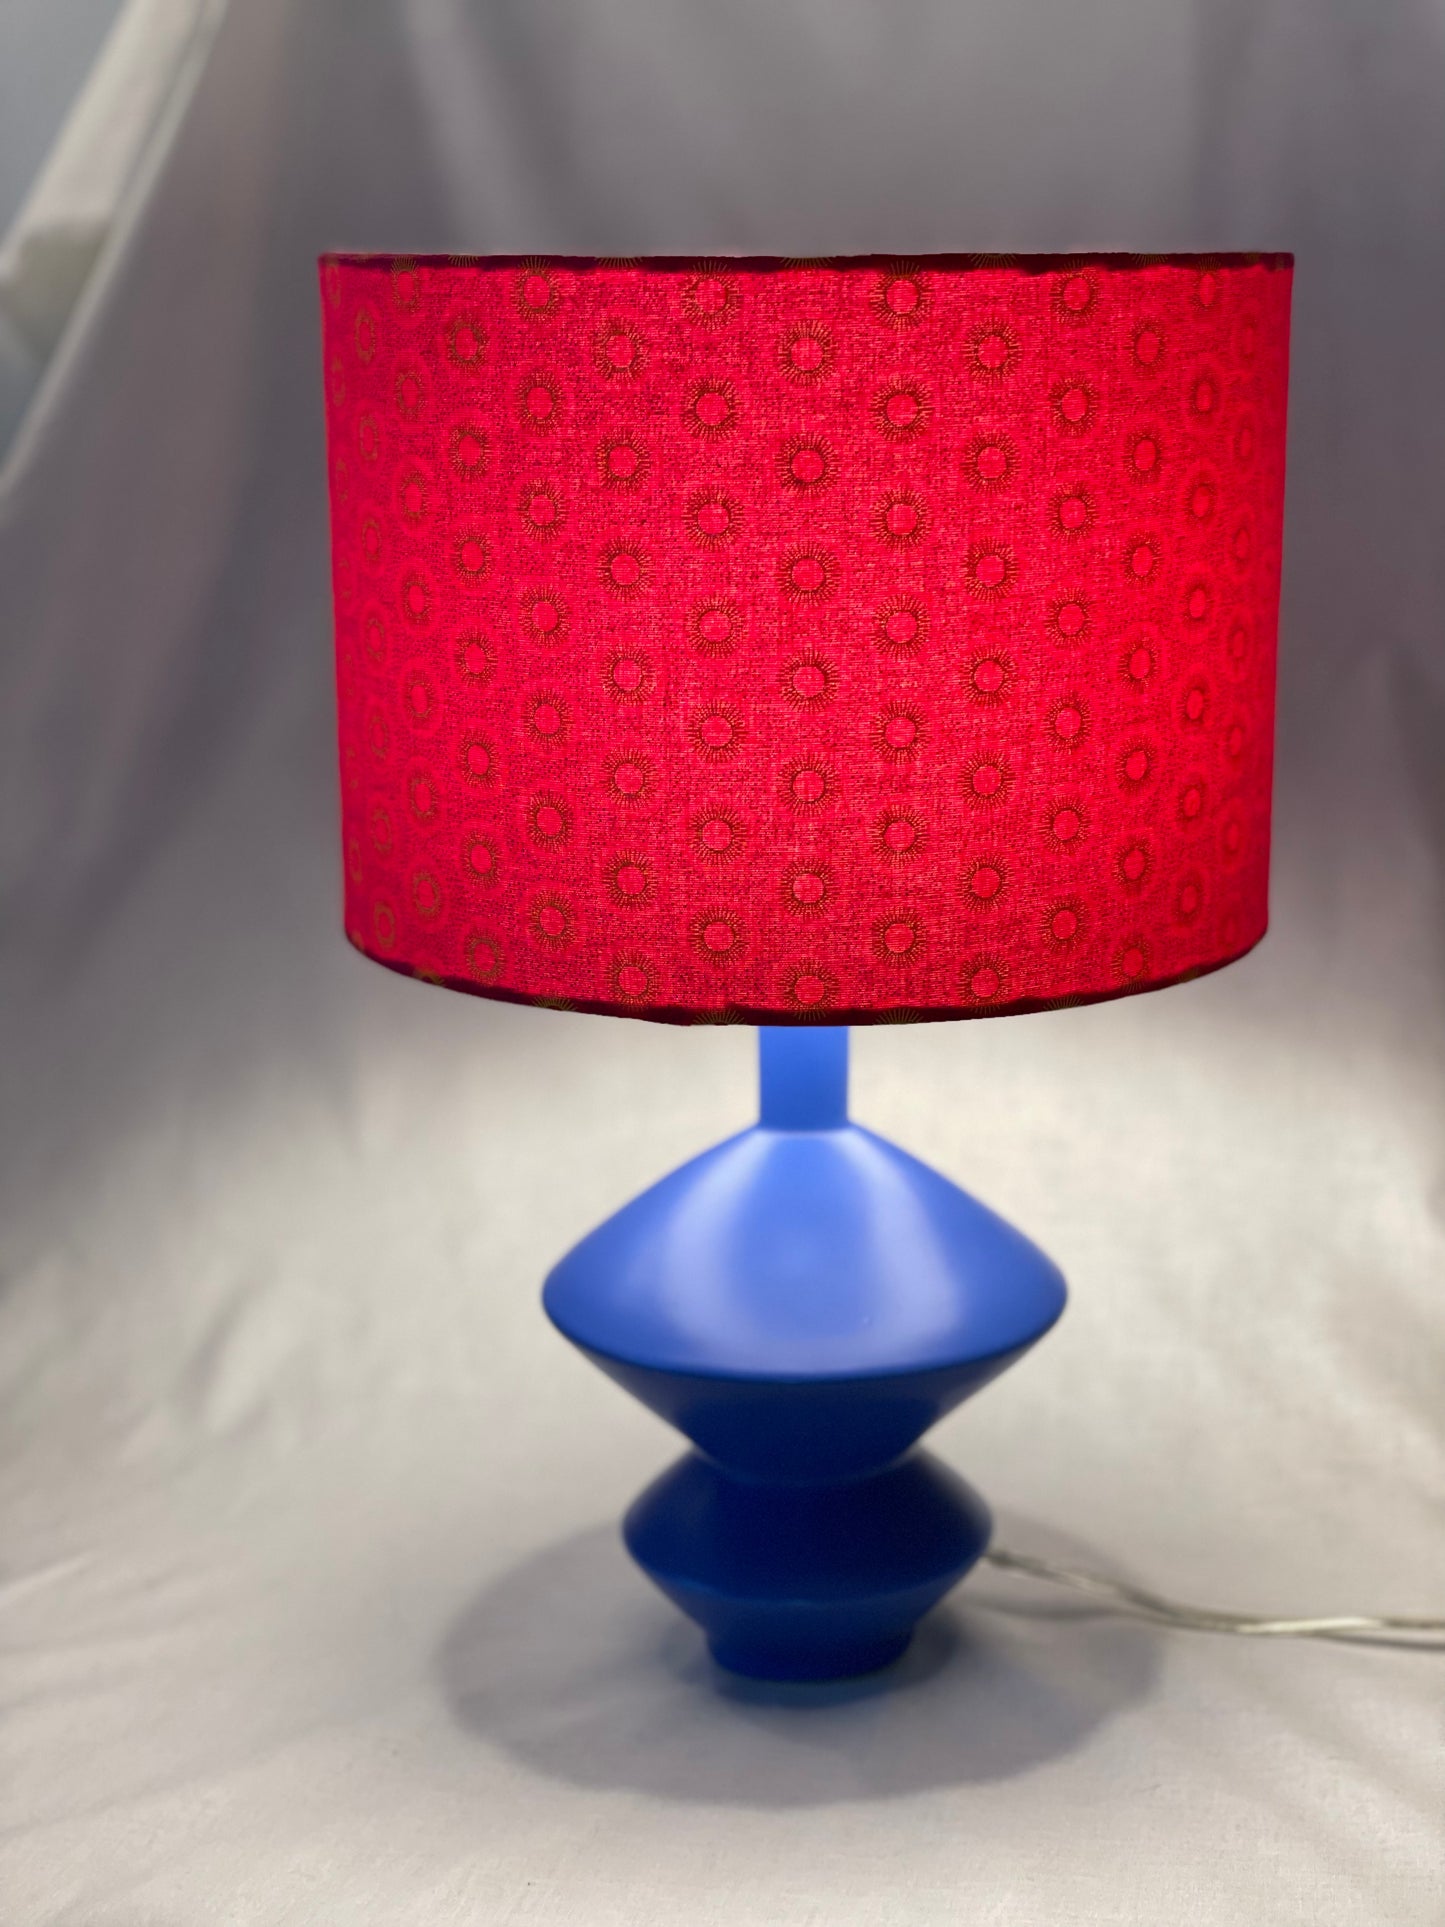 10 inch Drum Lampshade. Dynamic South African Shwe Shwe Print- Hot Pink with Golden Yellow Sun Motif.